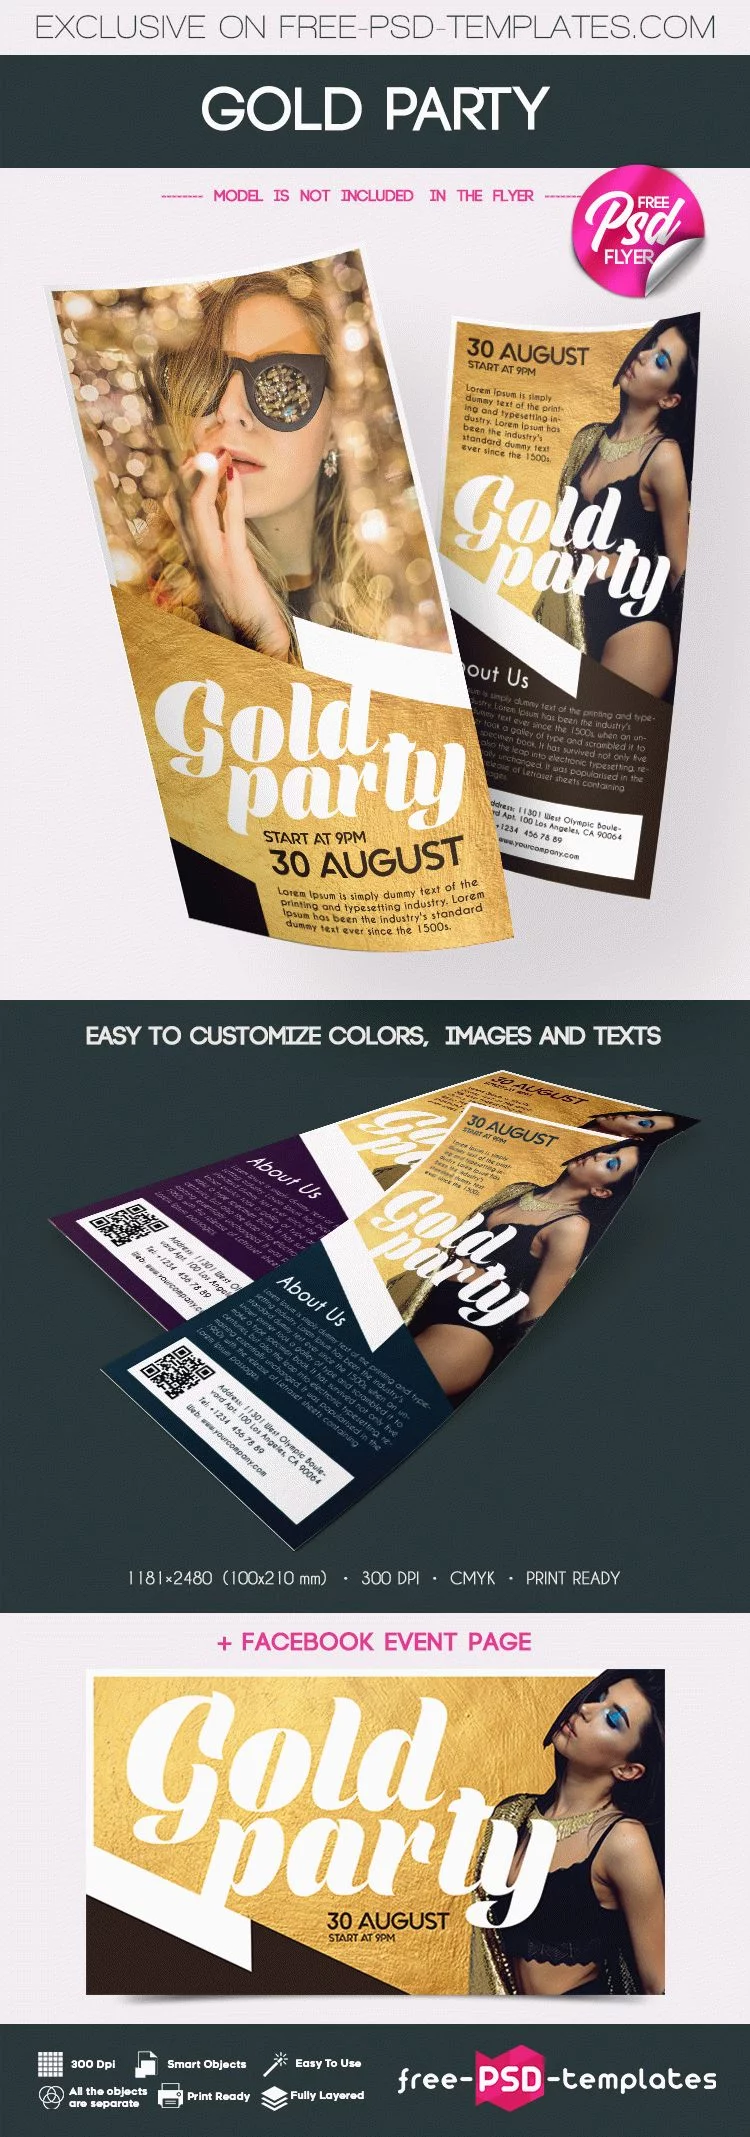 Free Gold Party DL Flyer in PSD